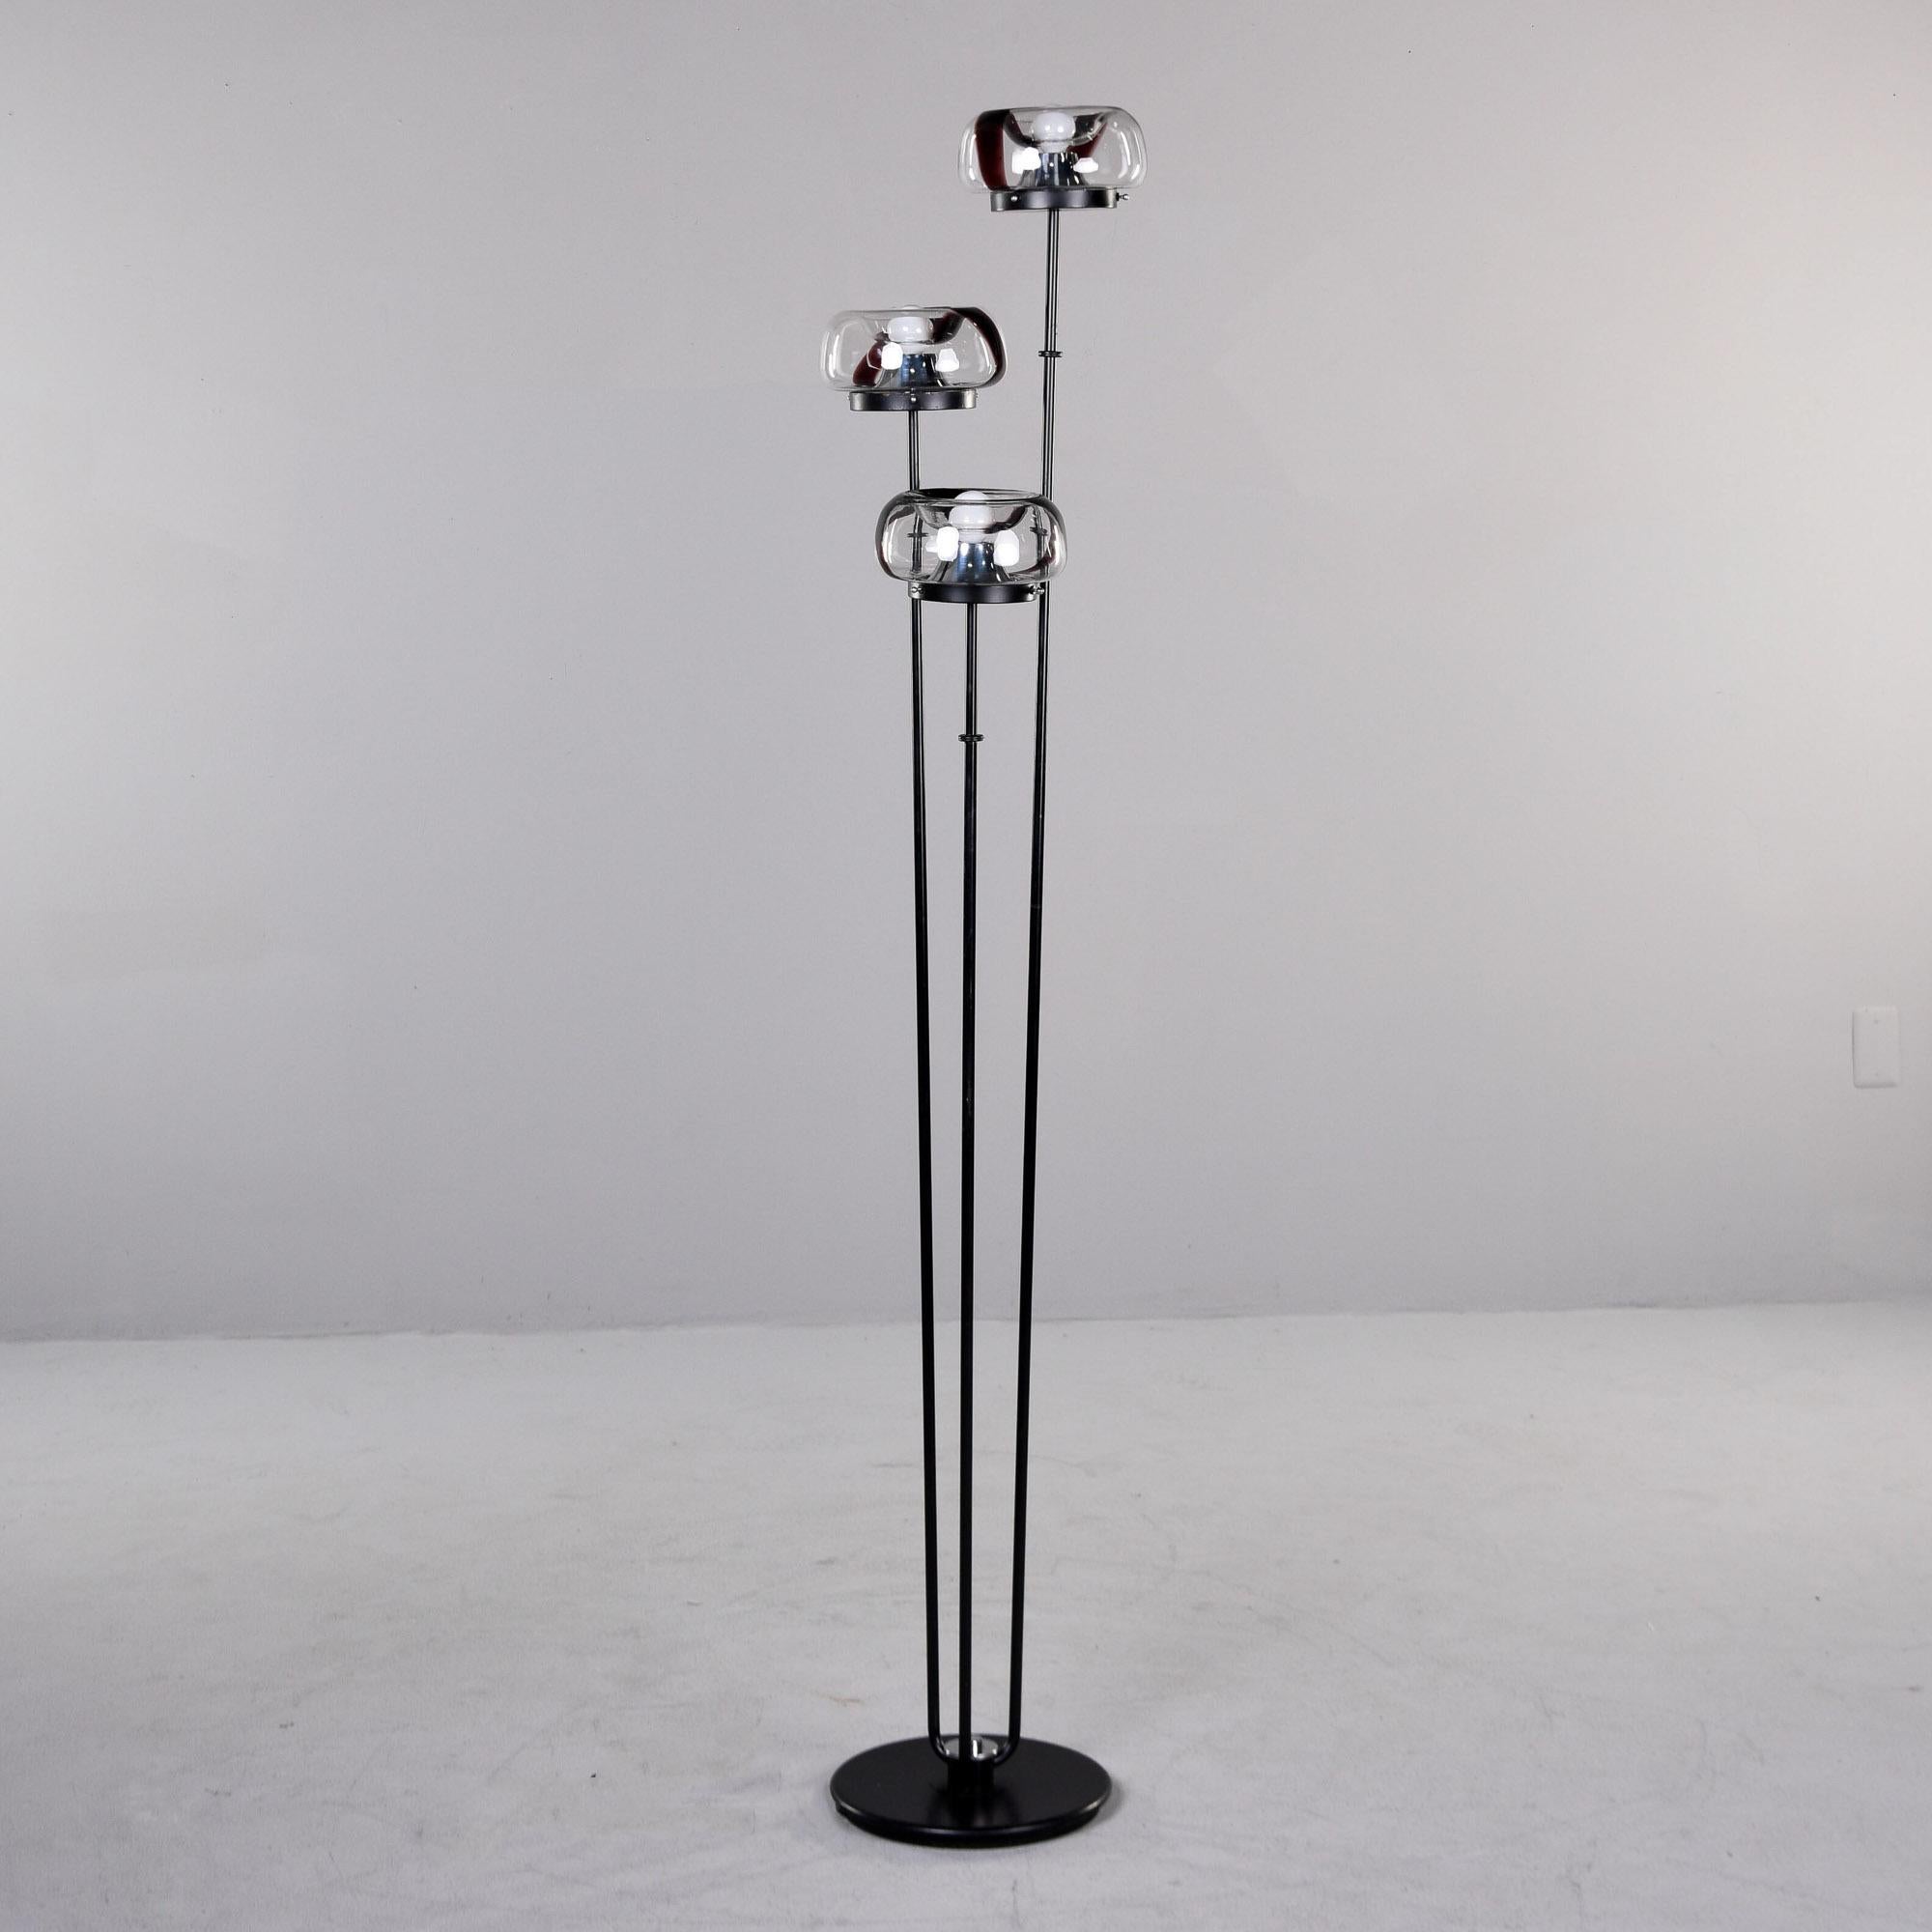 Found in Italy, this three light floor lamp by Mazzega dates from the 1970s. Black weighted metal base with three slender support rods topped with Mazzega Murano glass globes in clear with brown swirls. New wiring for US electrical standards and new